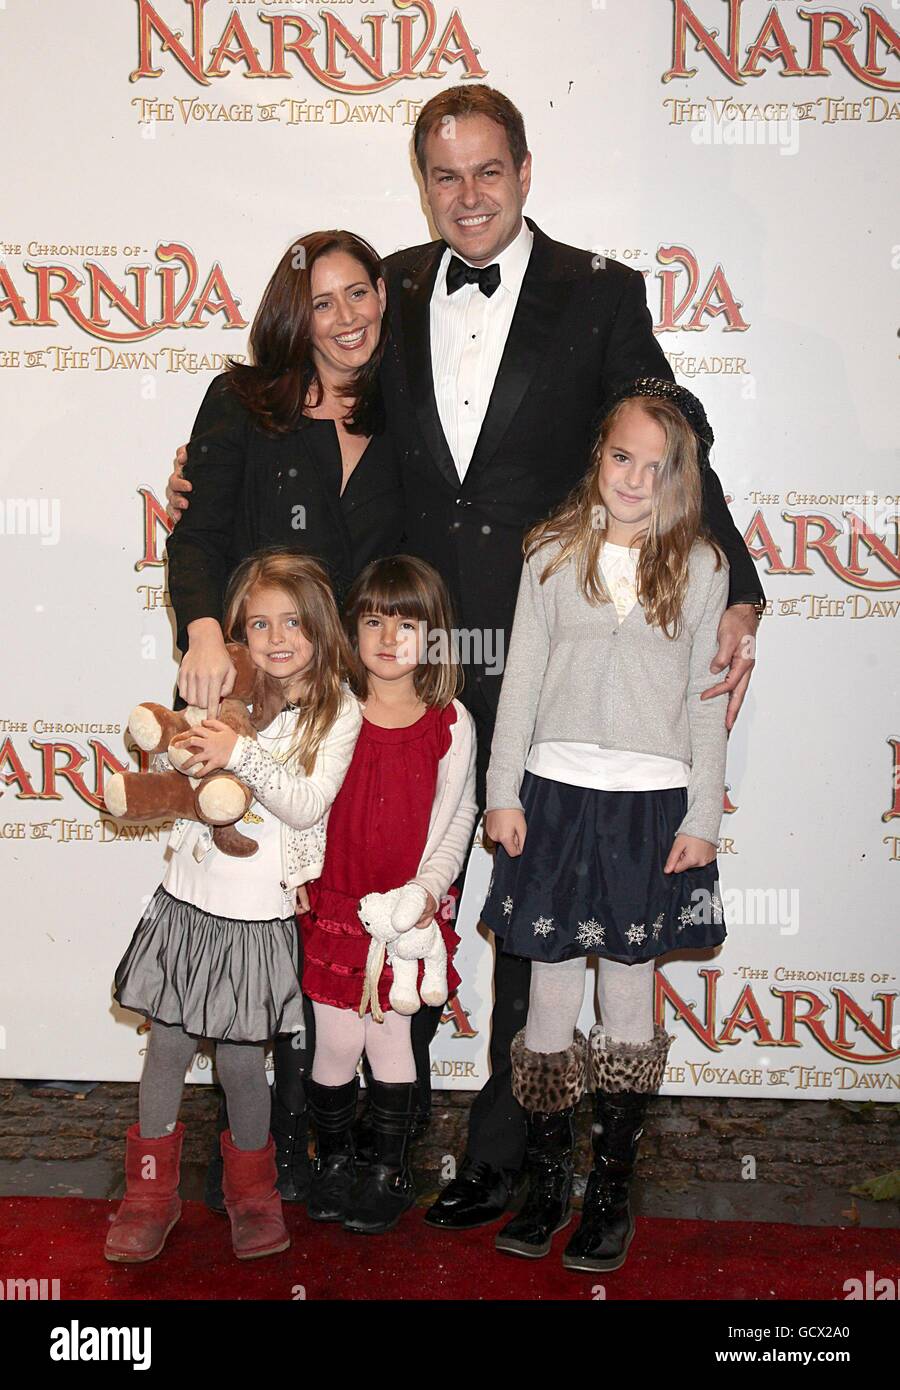 Peter Jones and his family arriving for the Royal Premiere of The Chronicles Of Narnia: The Voyage Of The Dawn Treader at the Odeon Leicester Square, central London. Stock Photo